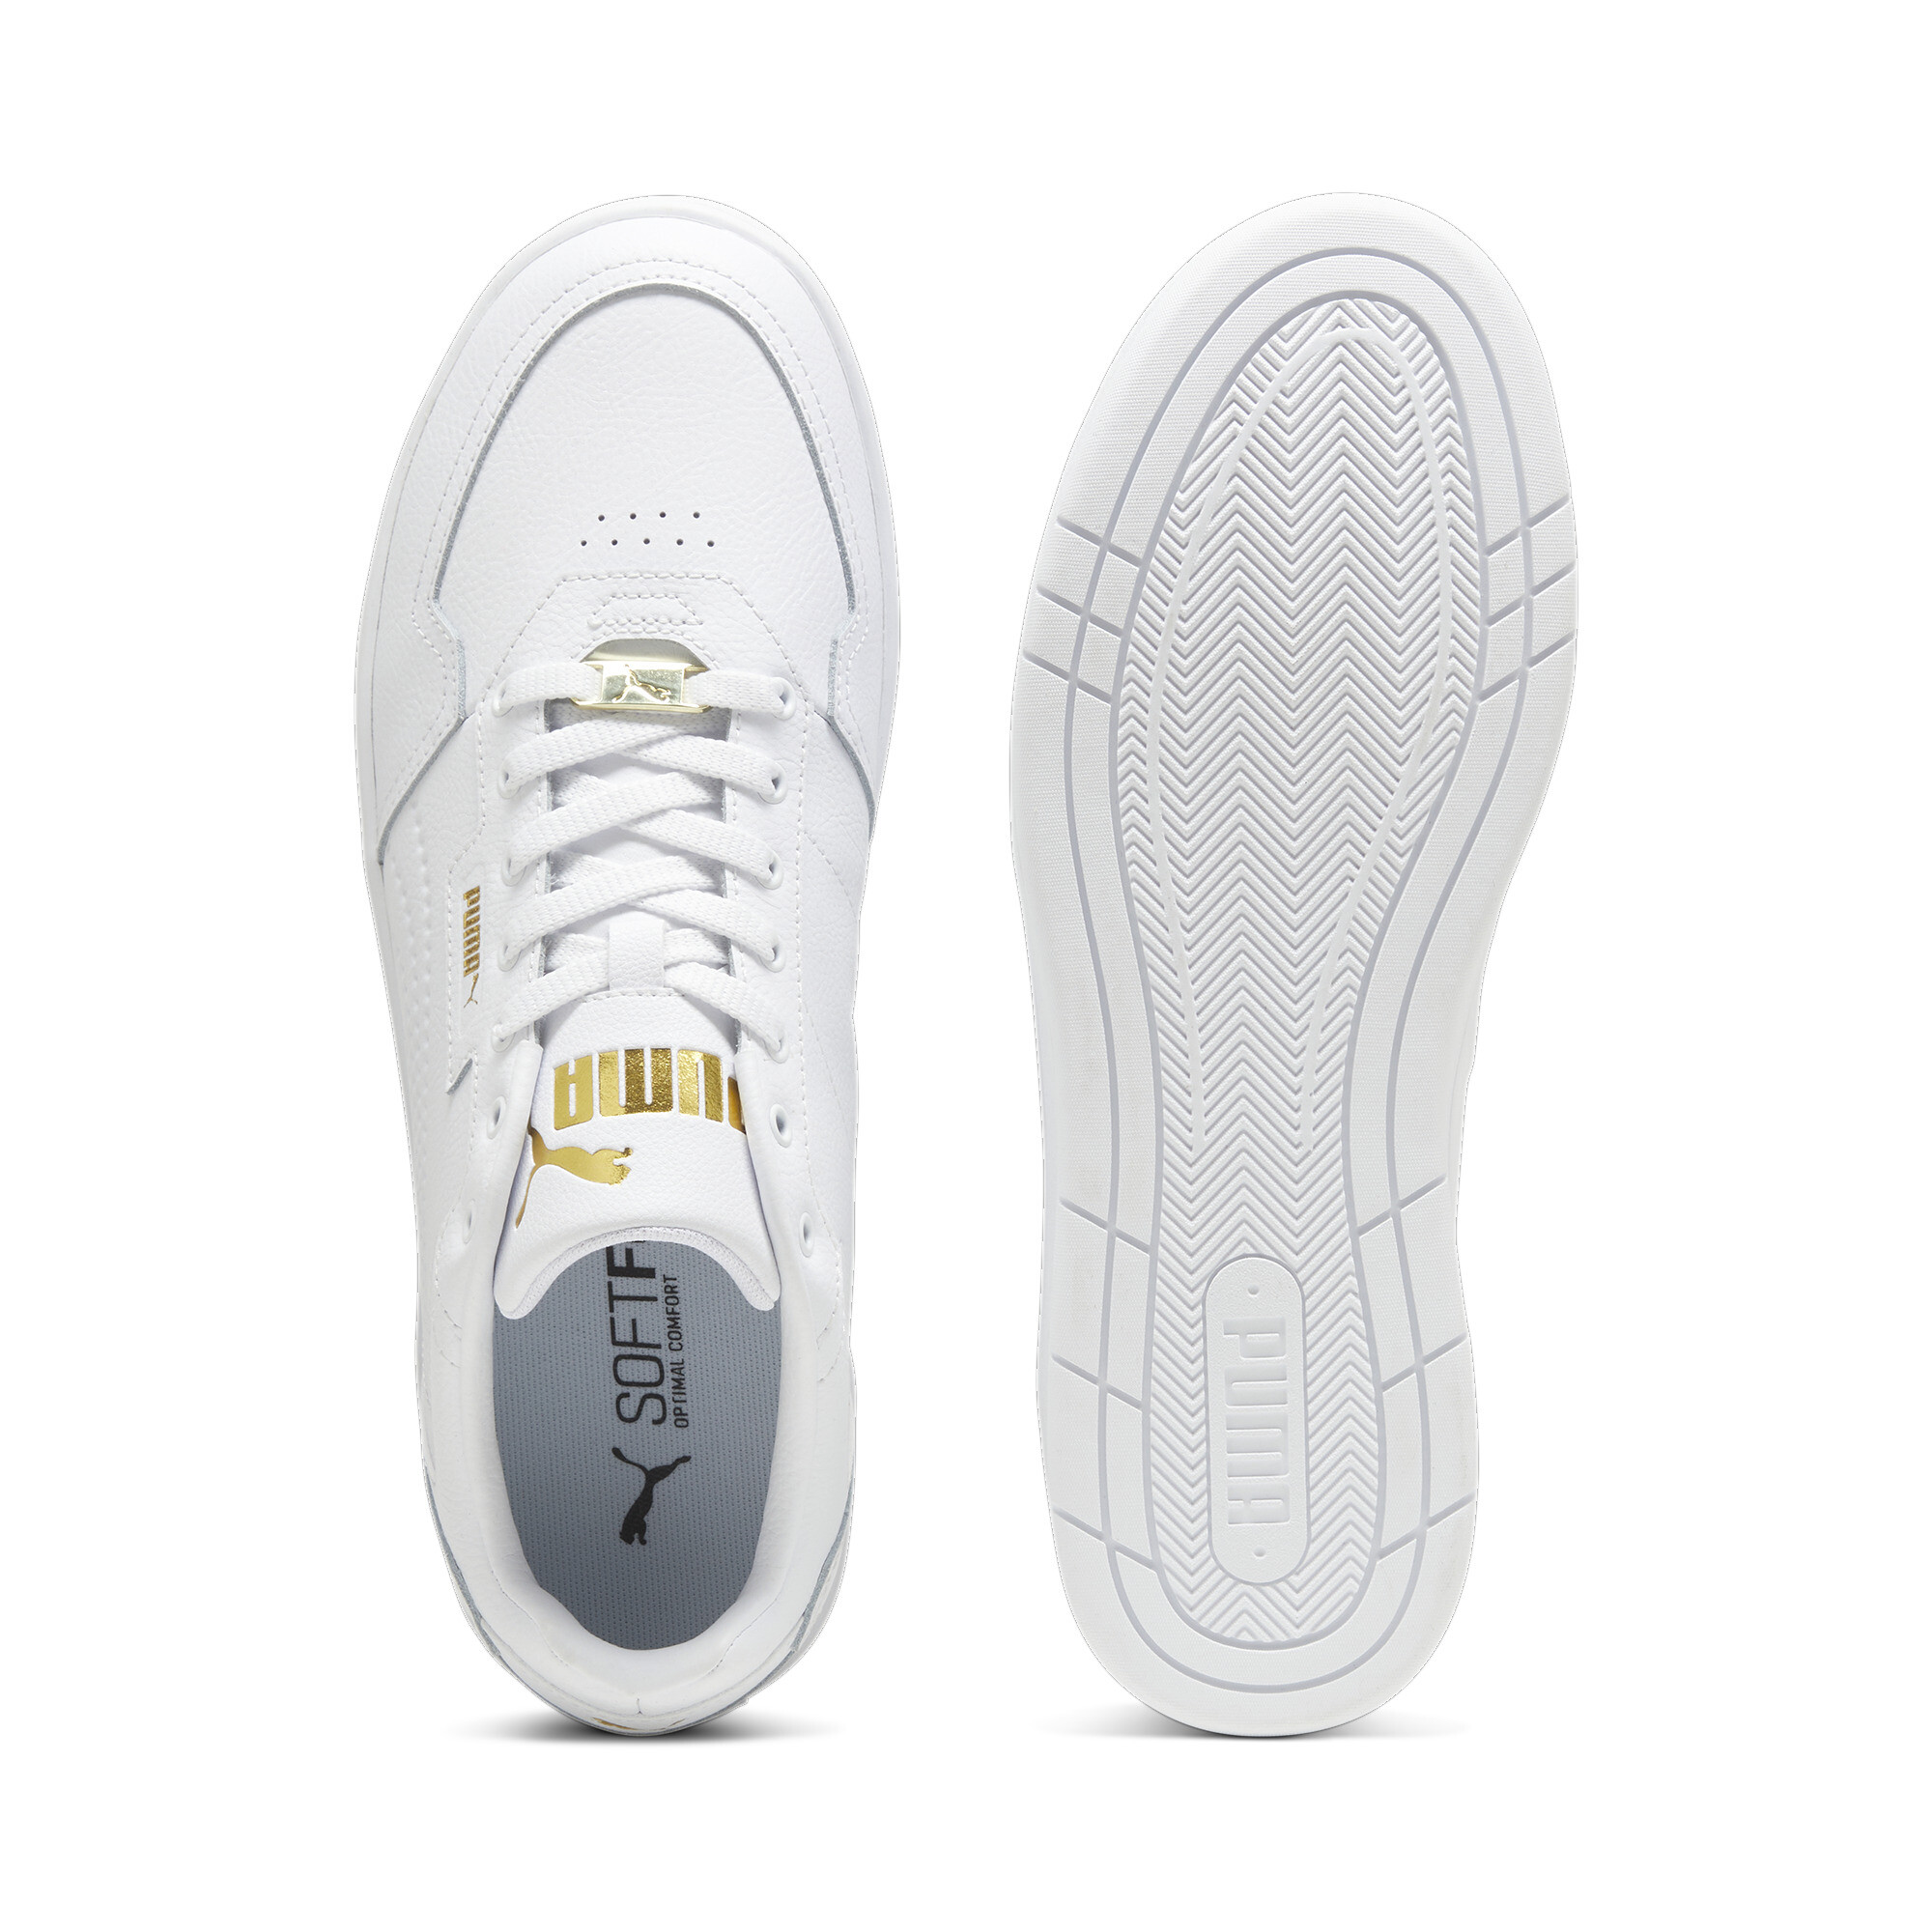 Puma Court Classic Lux Sneakers, White, Size 48, Shoes